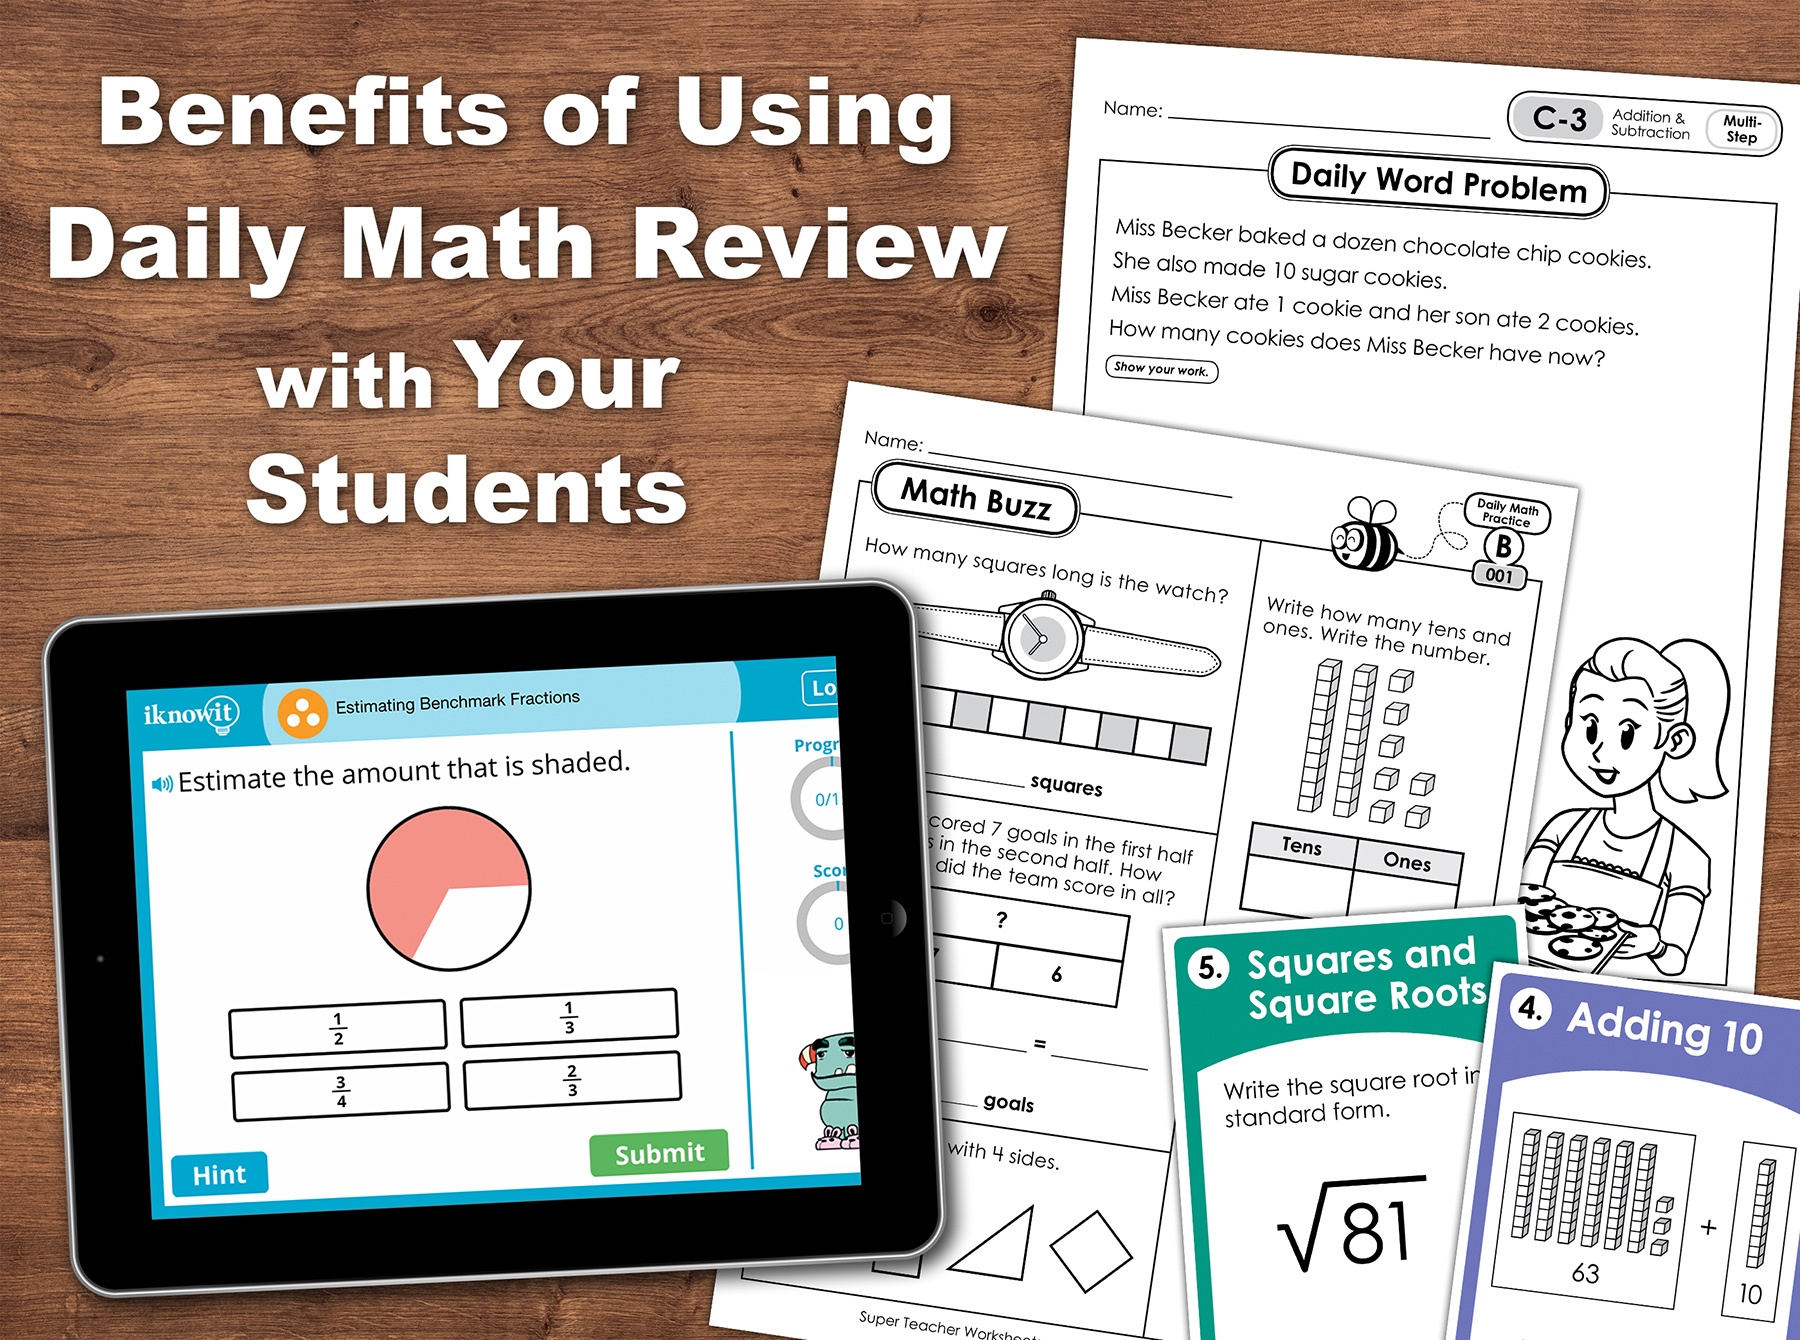 Tips for Successful Daily Math Review